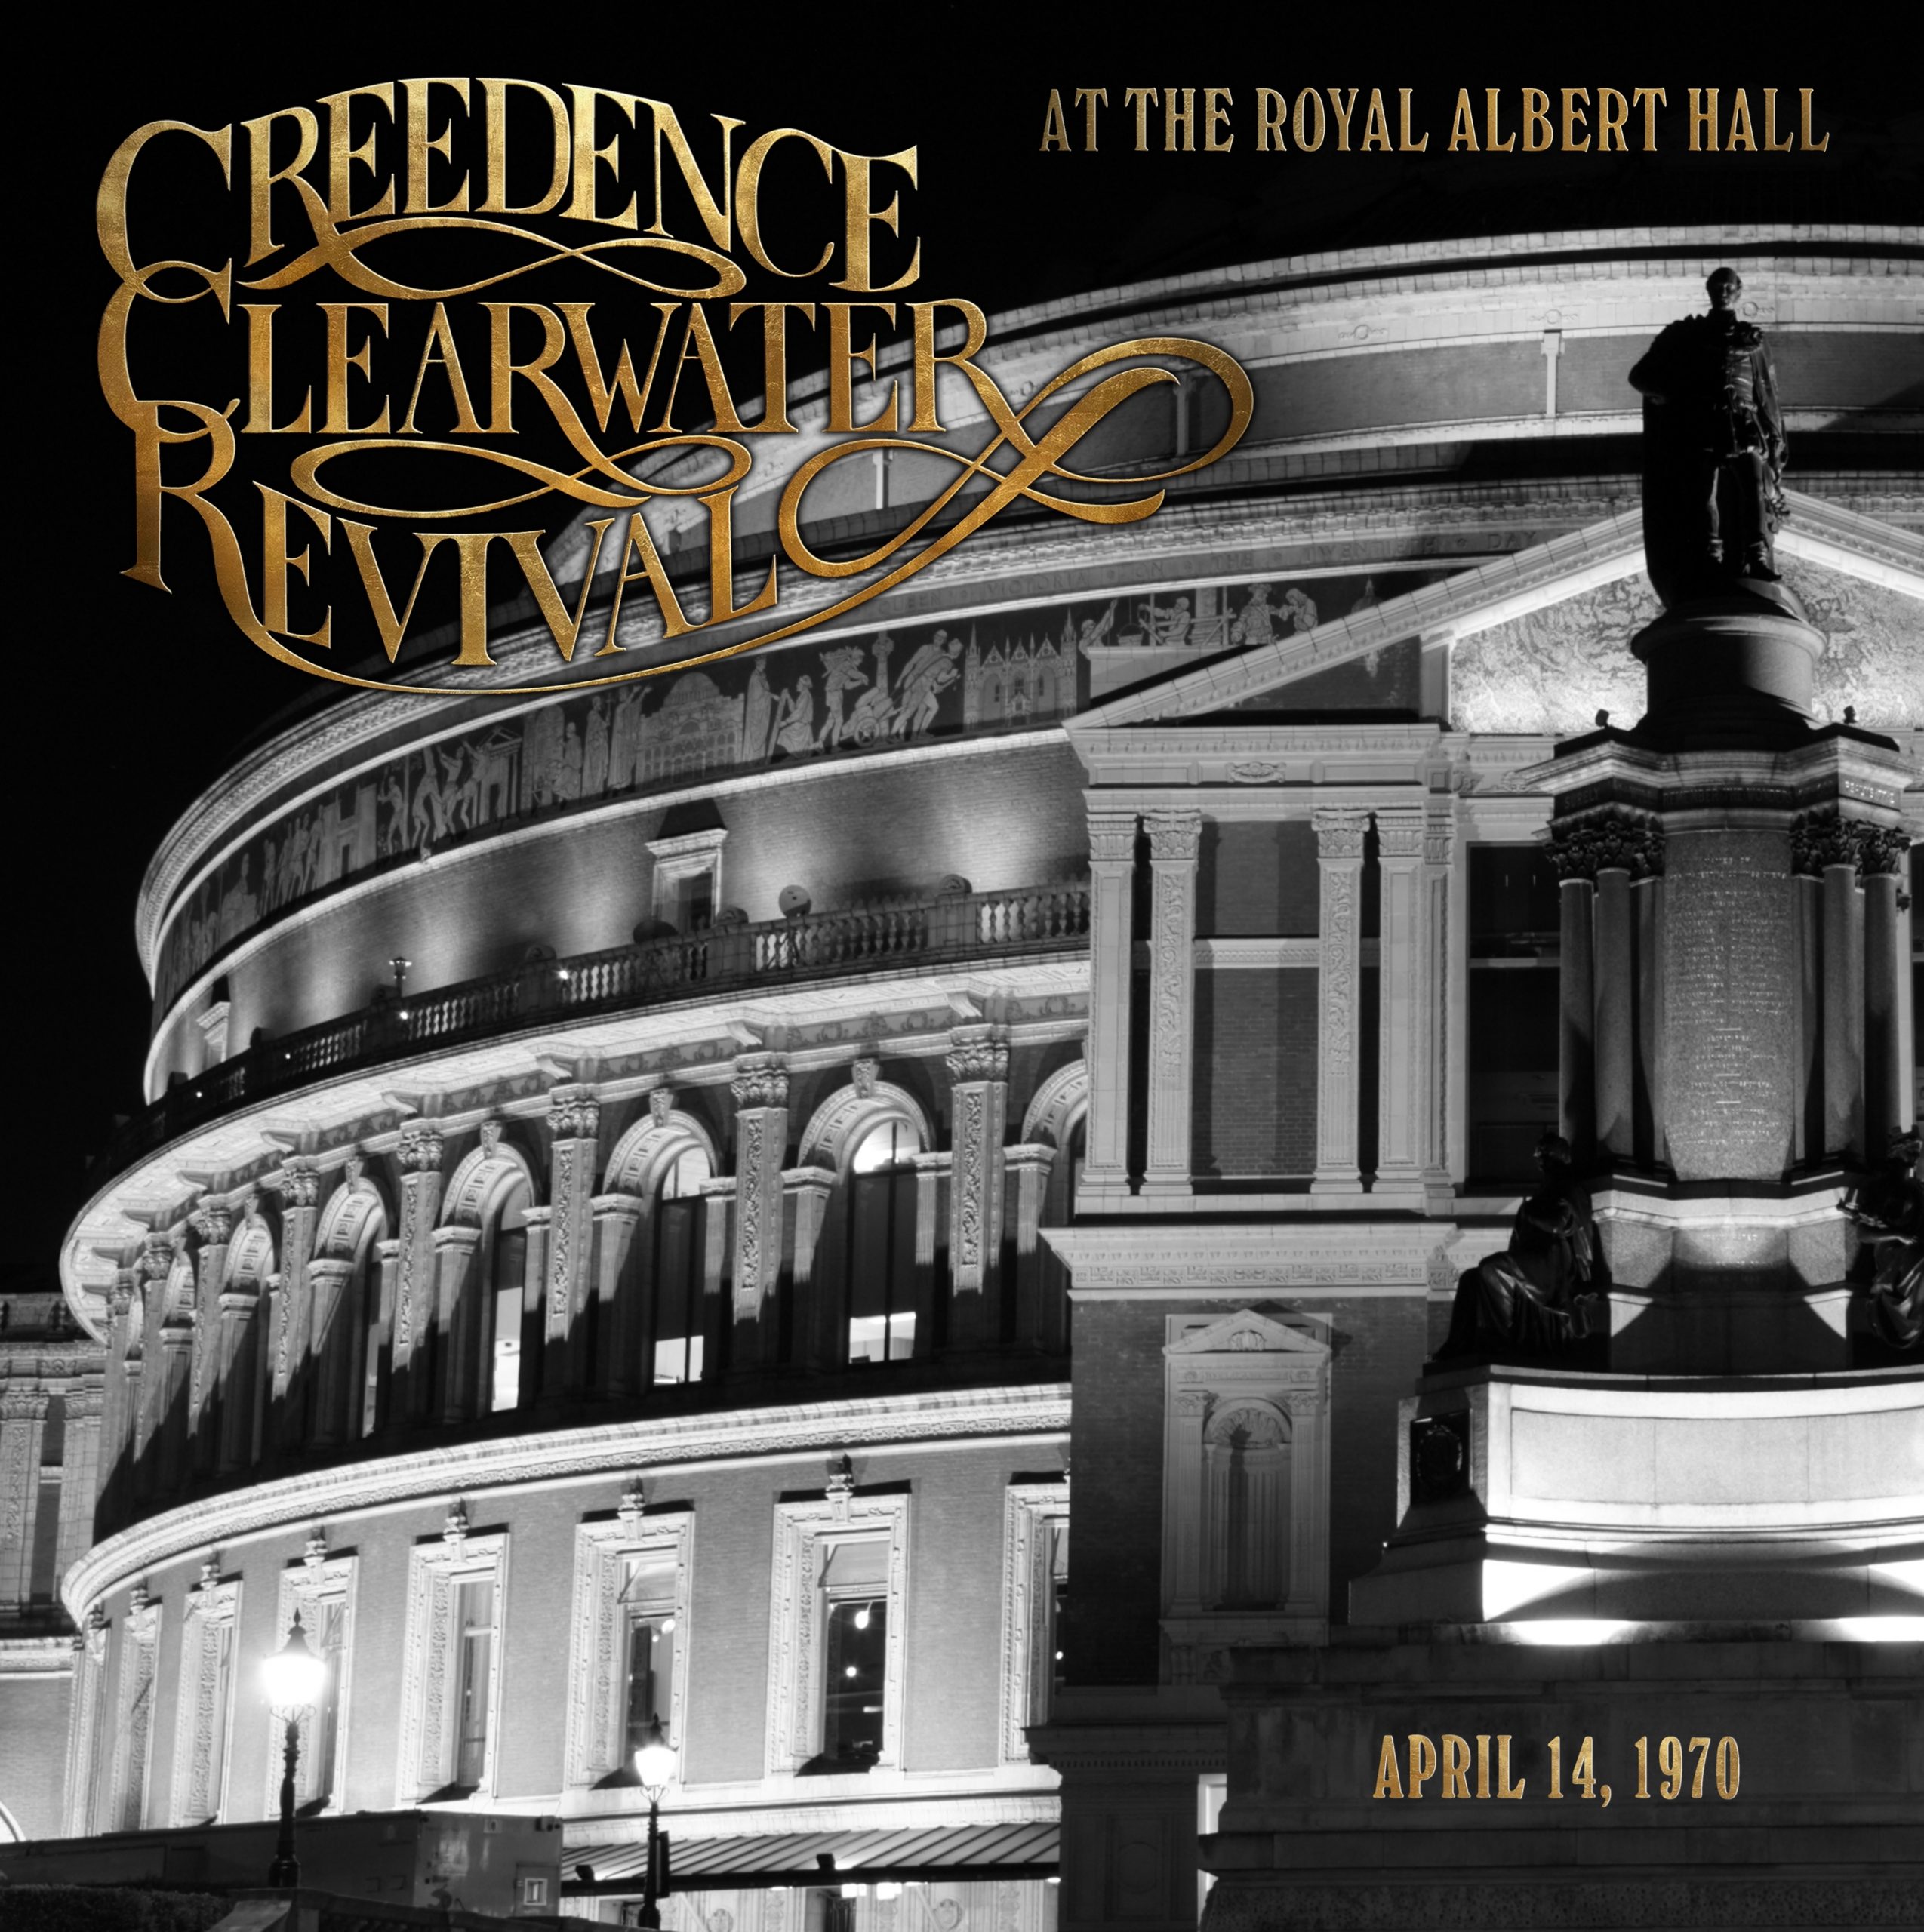 CD Shop - CREEDENCE CLEARWATER REVI AT THE ROYAL ALBERT HALL (APRIL 14, 1970)